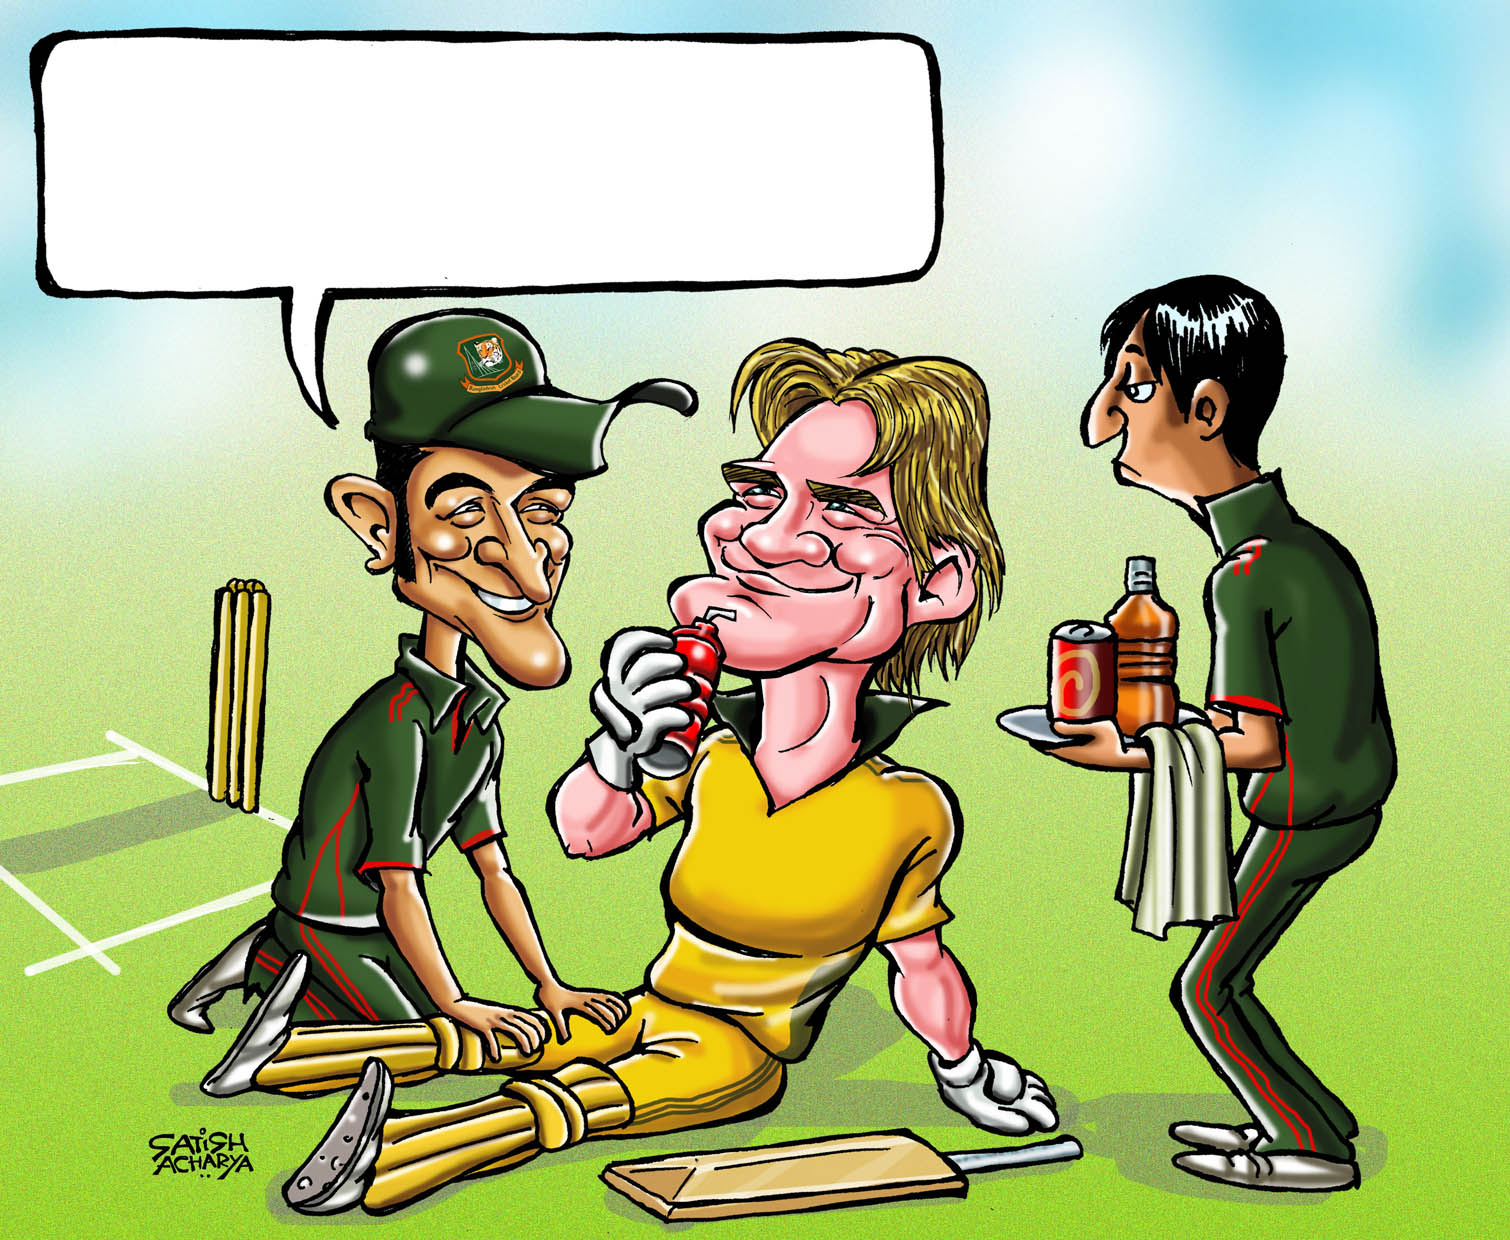 in this cricinfo cartoon